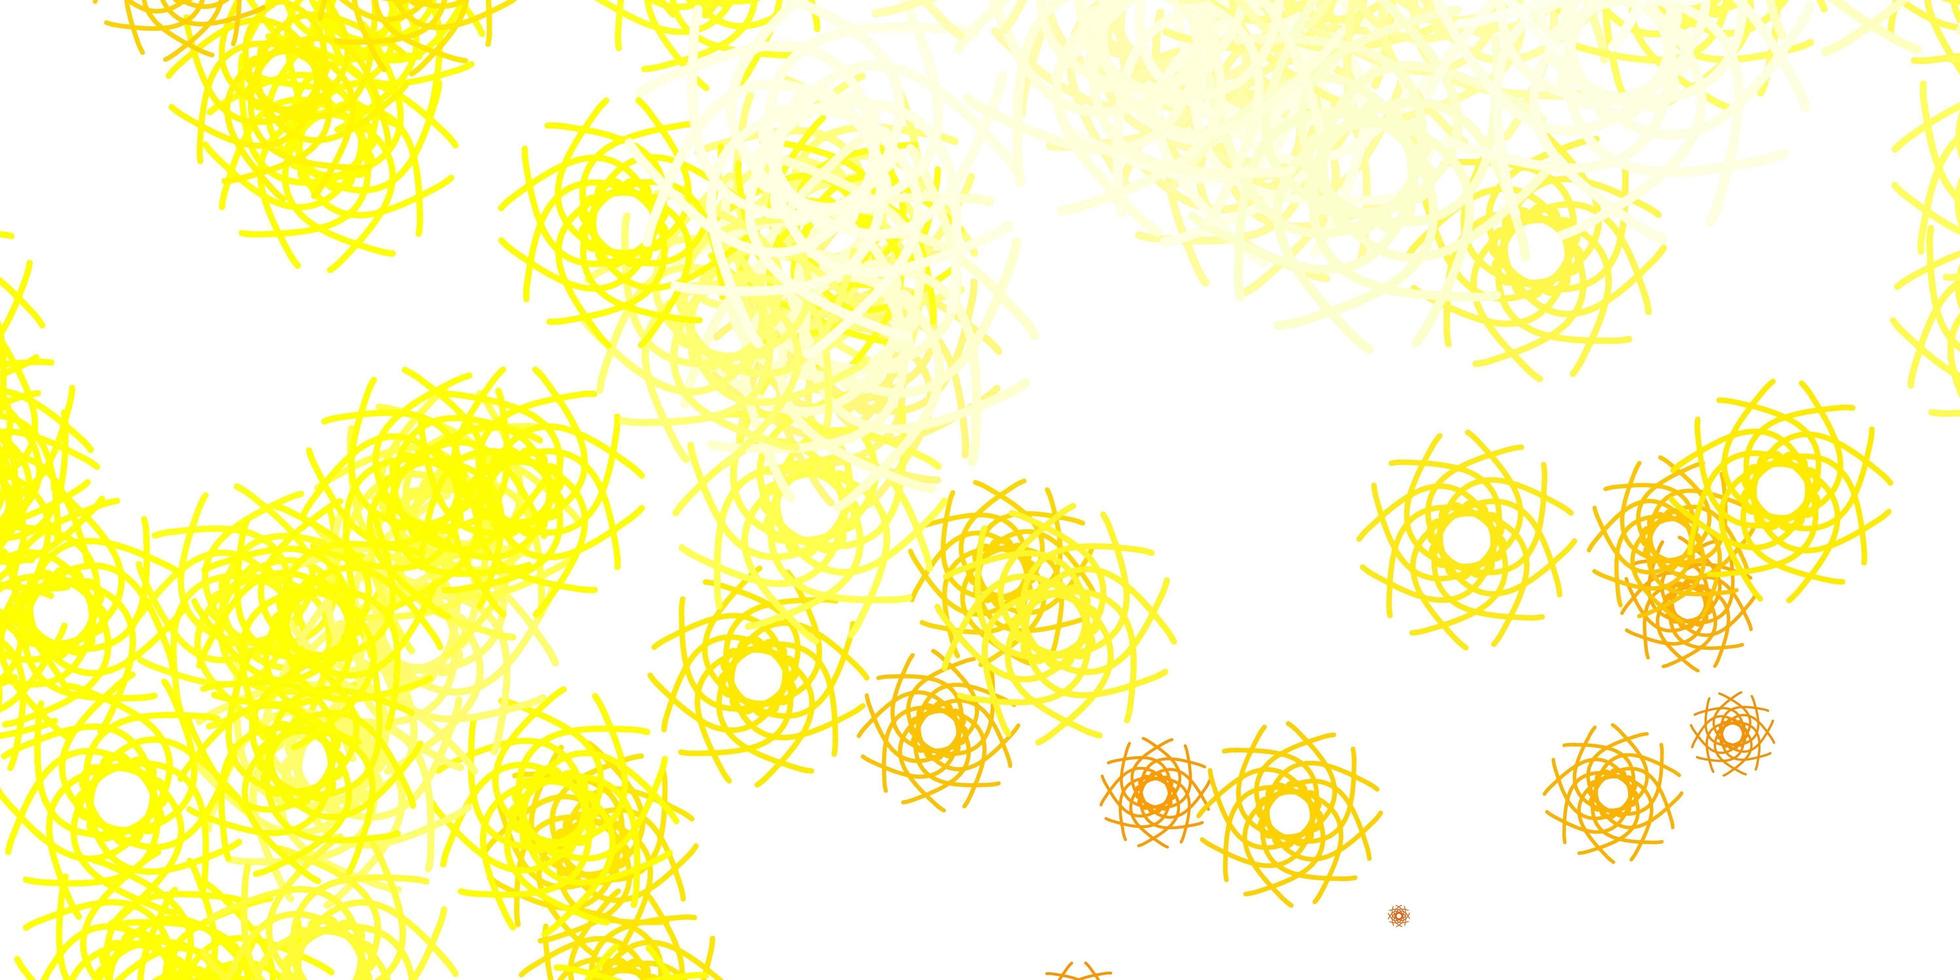 Light Yellow vector background with random forms.